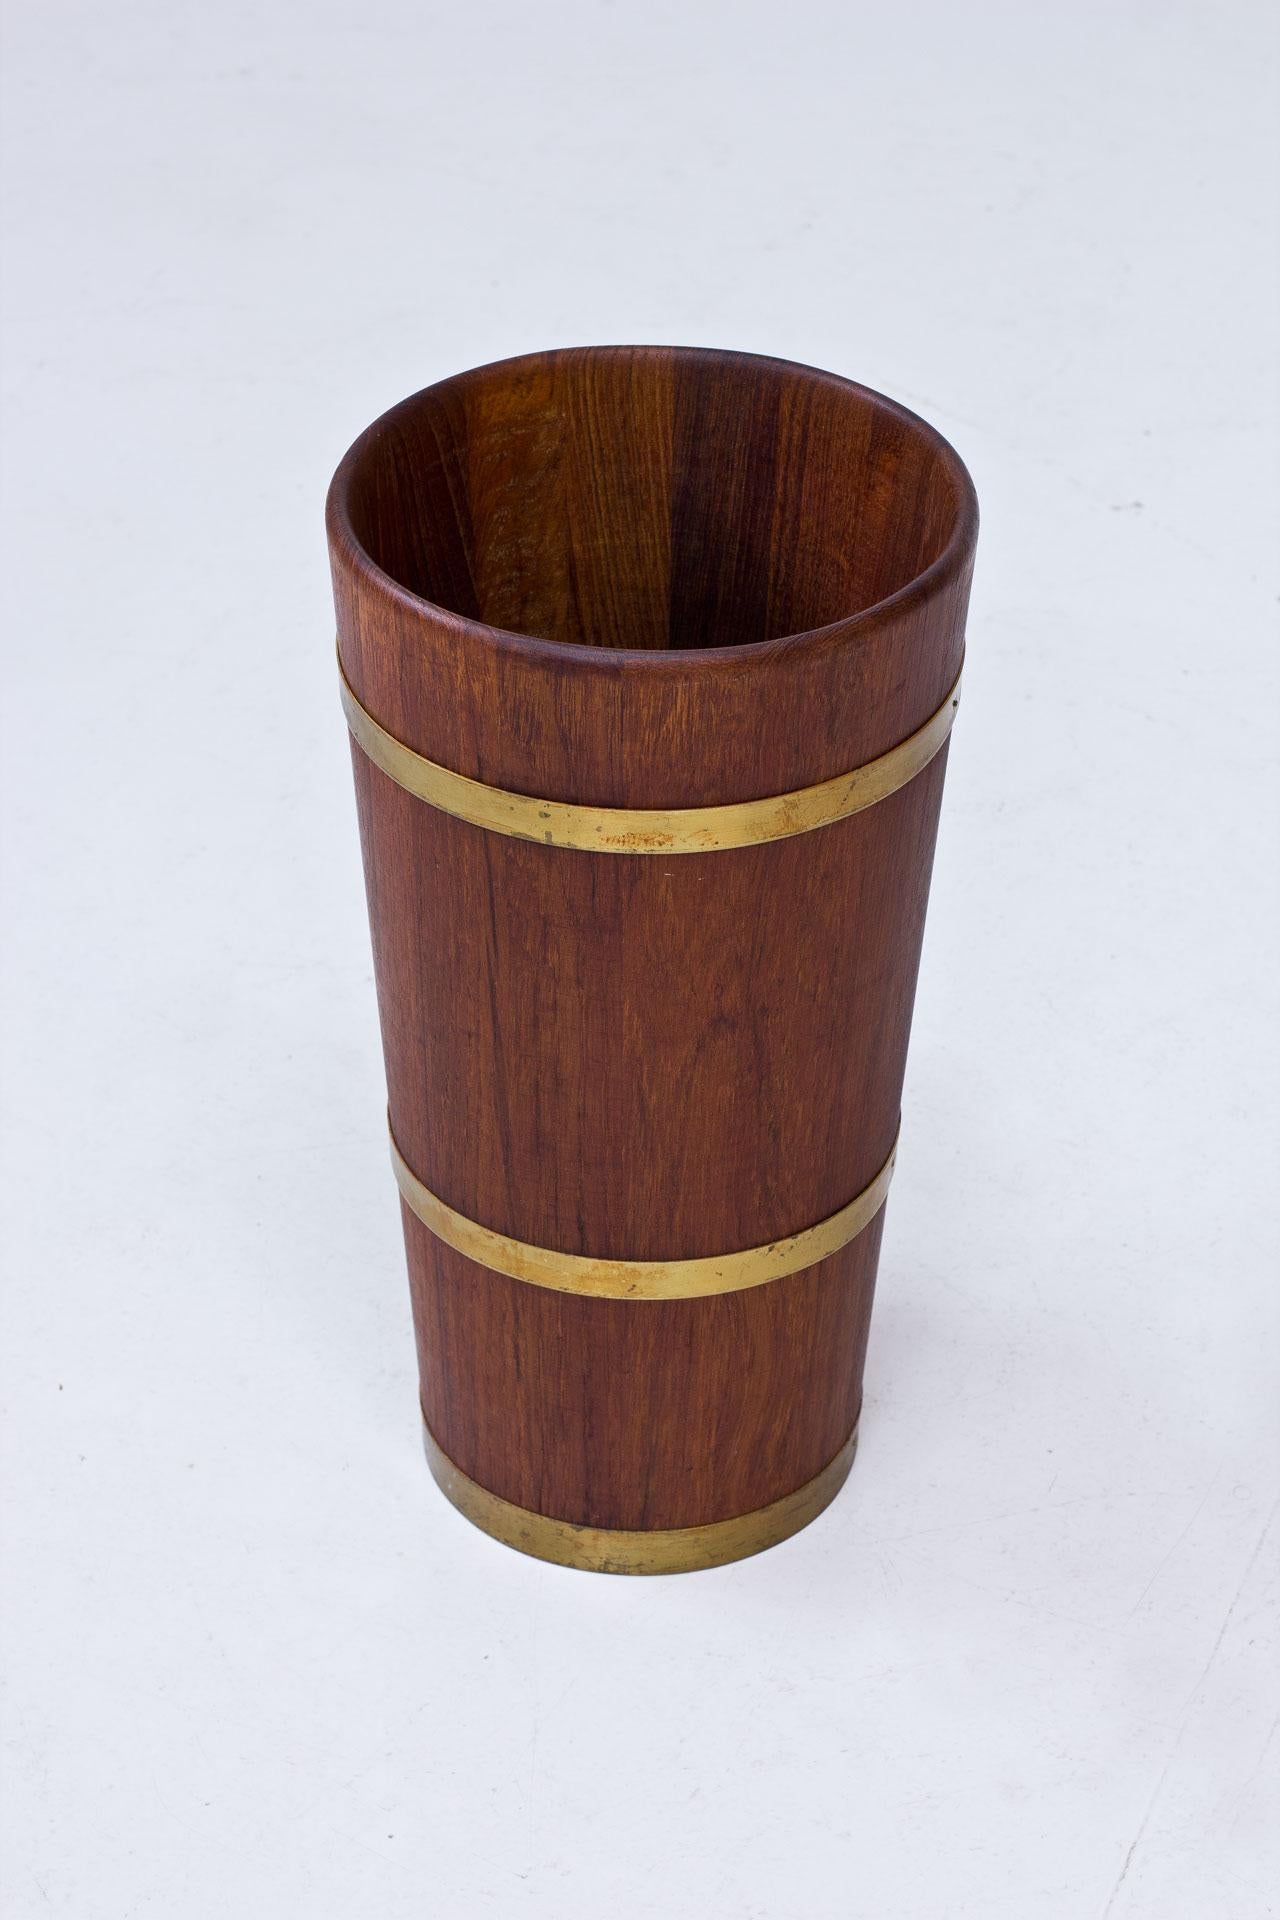 1950s umbrella stand, manufactured in Sweden. Solid teak with brass rings.
Useful as a paper basket.